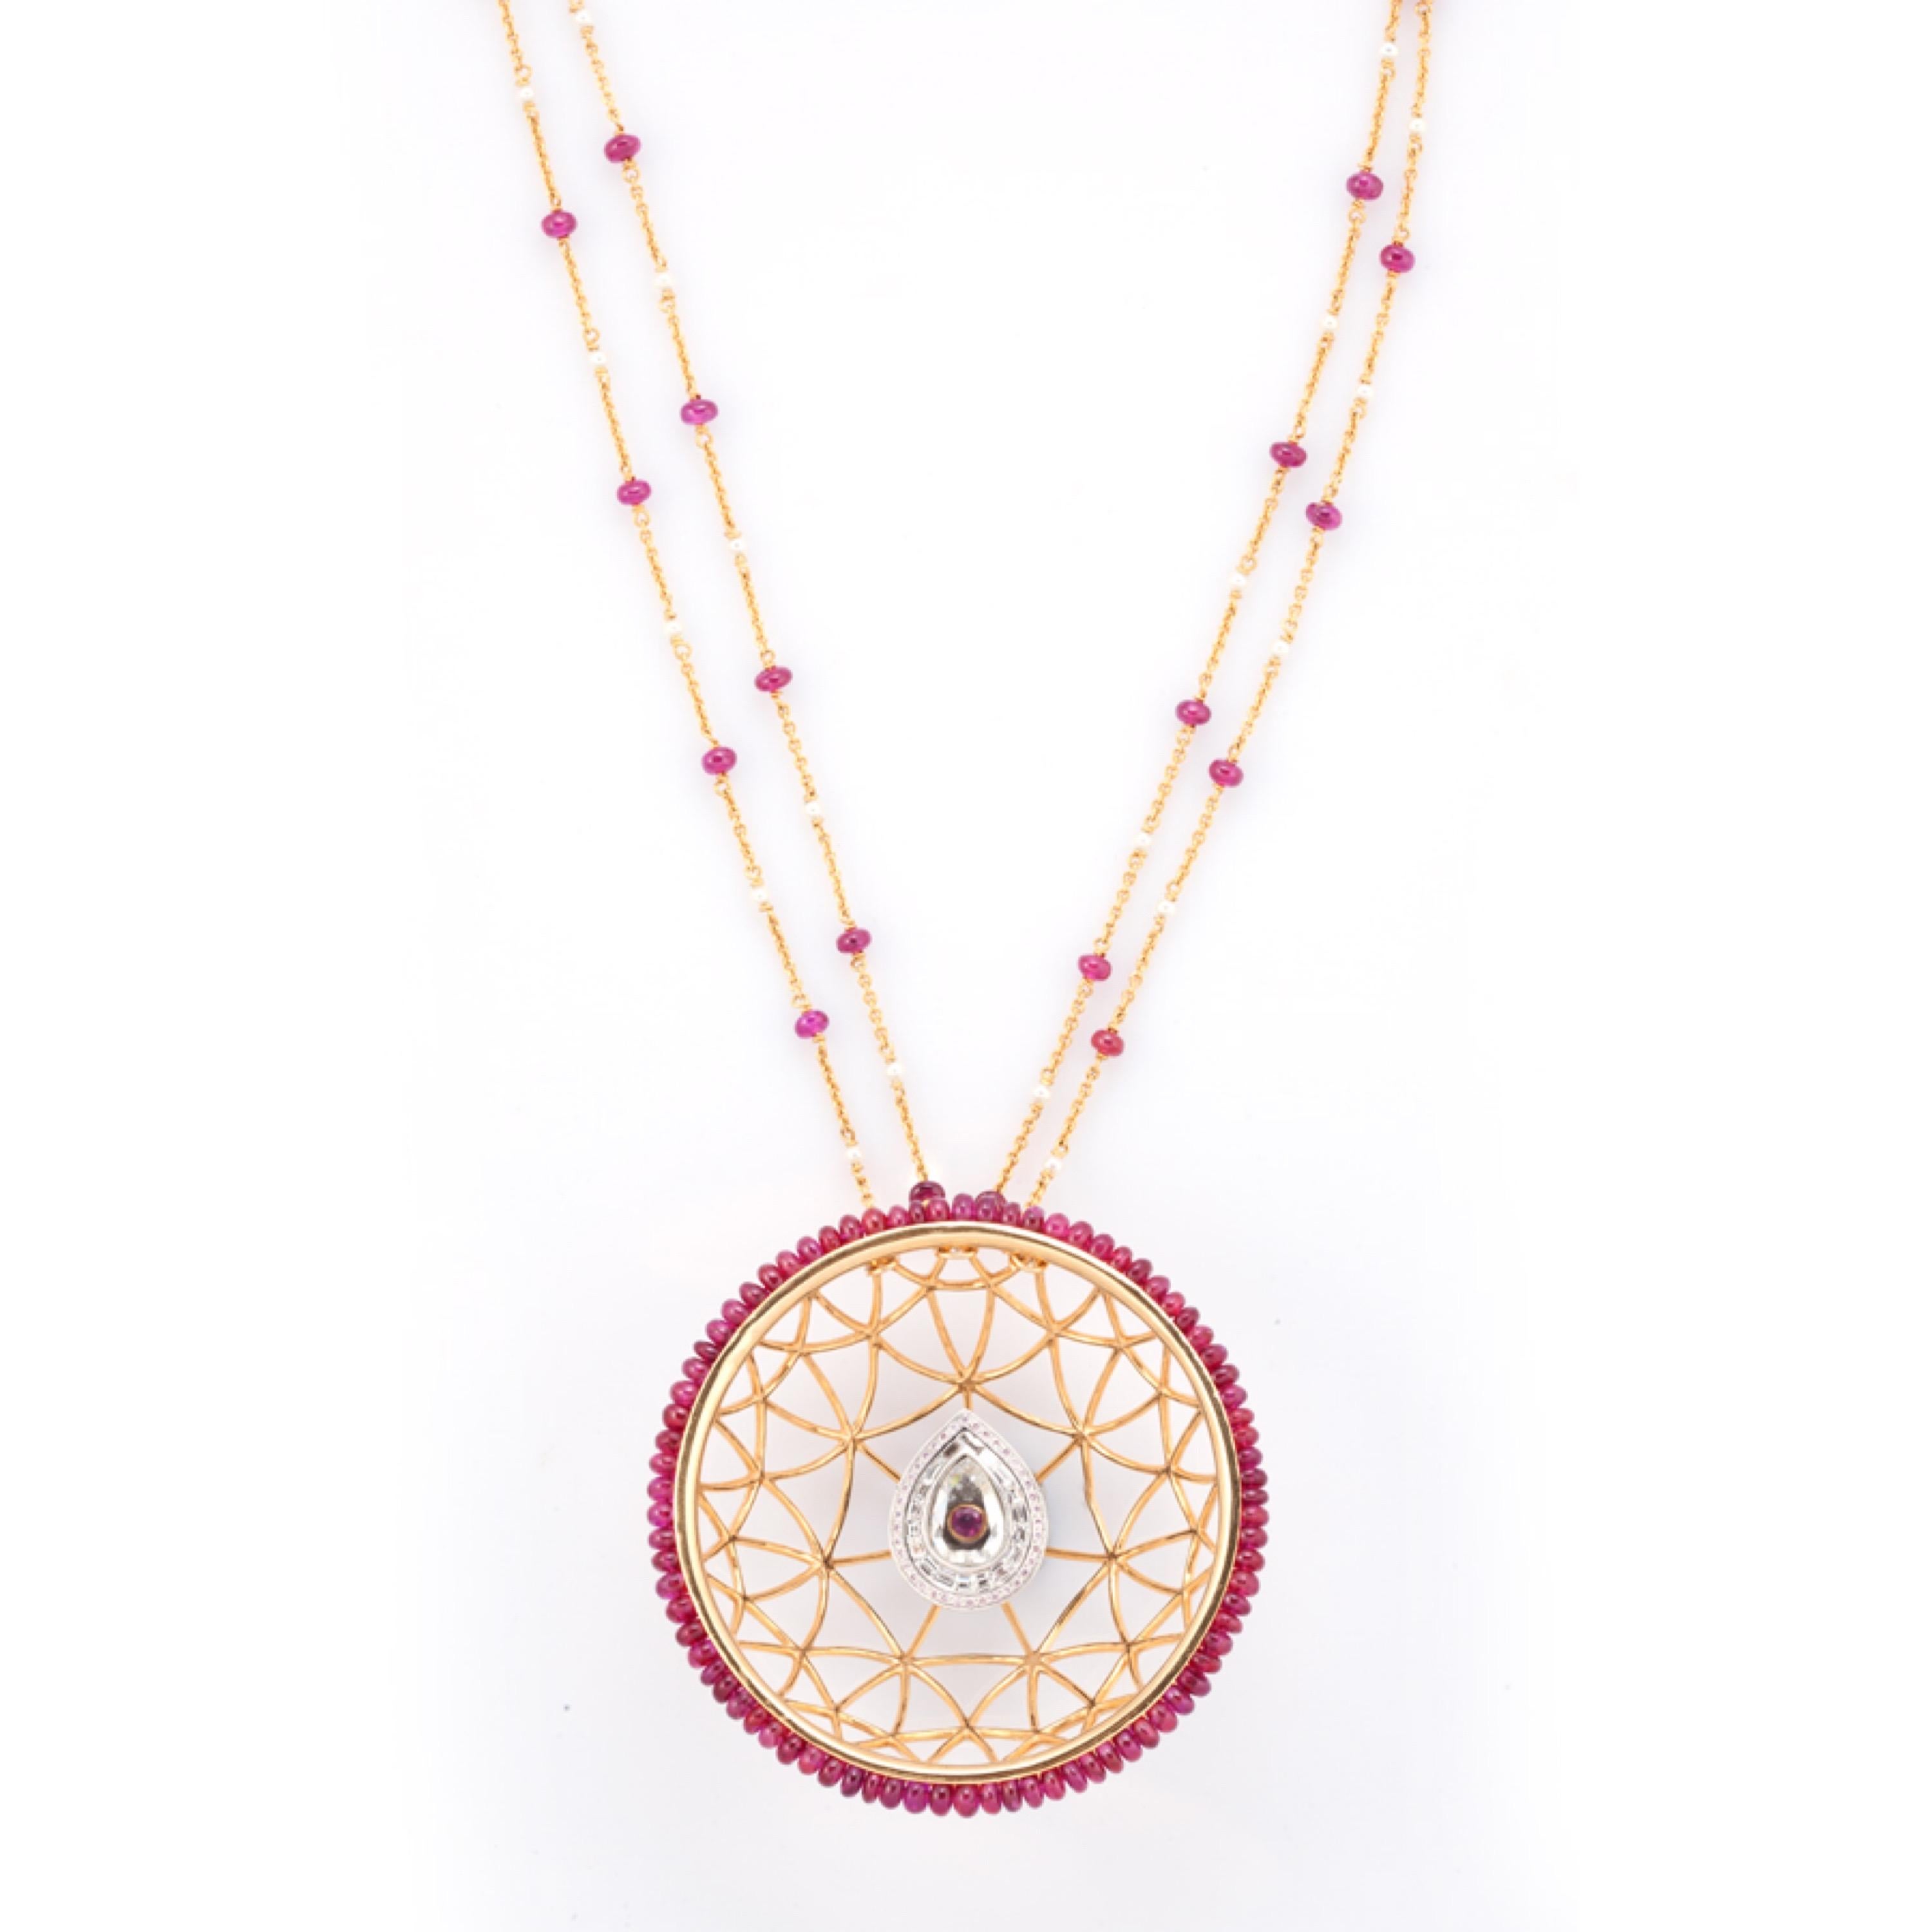 Tessellated techniques favored by the Dutch graphic artist MC Escher inspire this stunning D’Joya piece. Innovation comes from gold wires used to depict a spider’s web, which form a circular pendant bordered by 38 unheated Tajikistan ruby beads. The